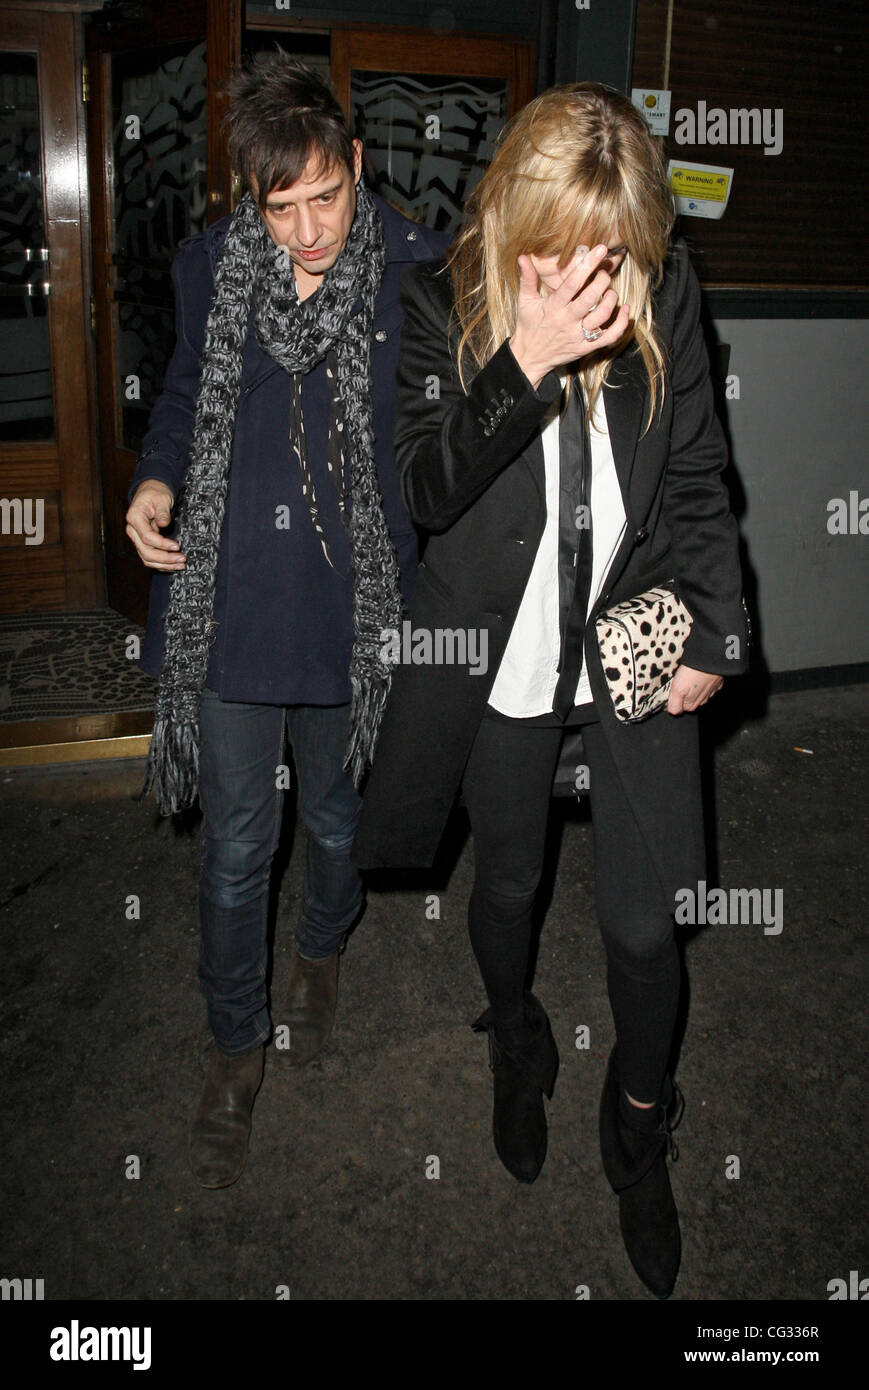 Kate Moss and Jamie Hince leaving Groucho Club at 3am, Kate arrived at 9.45pm and met Jamie inside. London, England - 14.12.10 Stock Photo